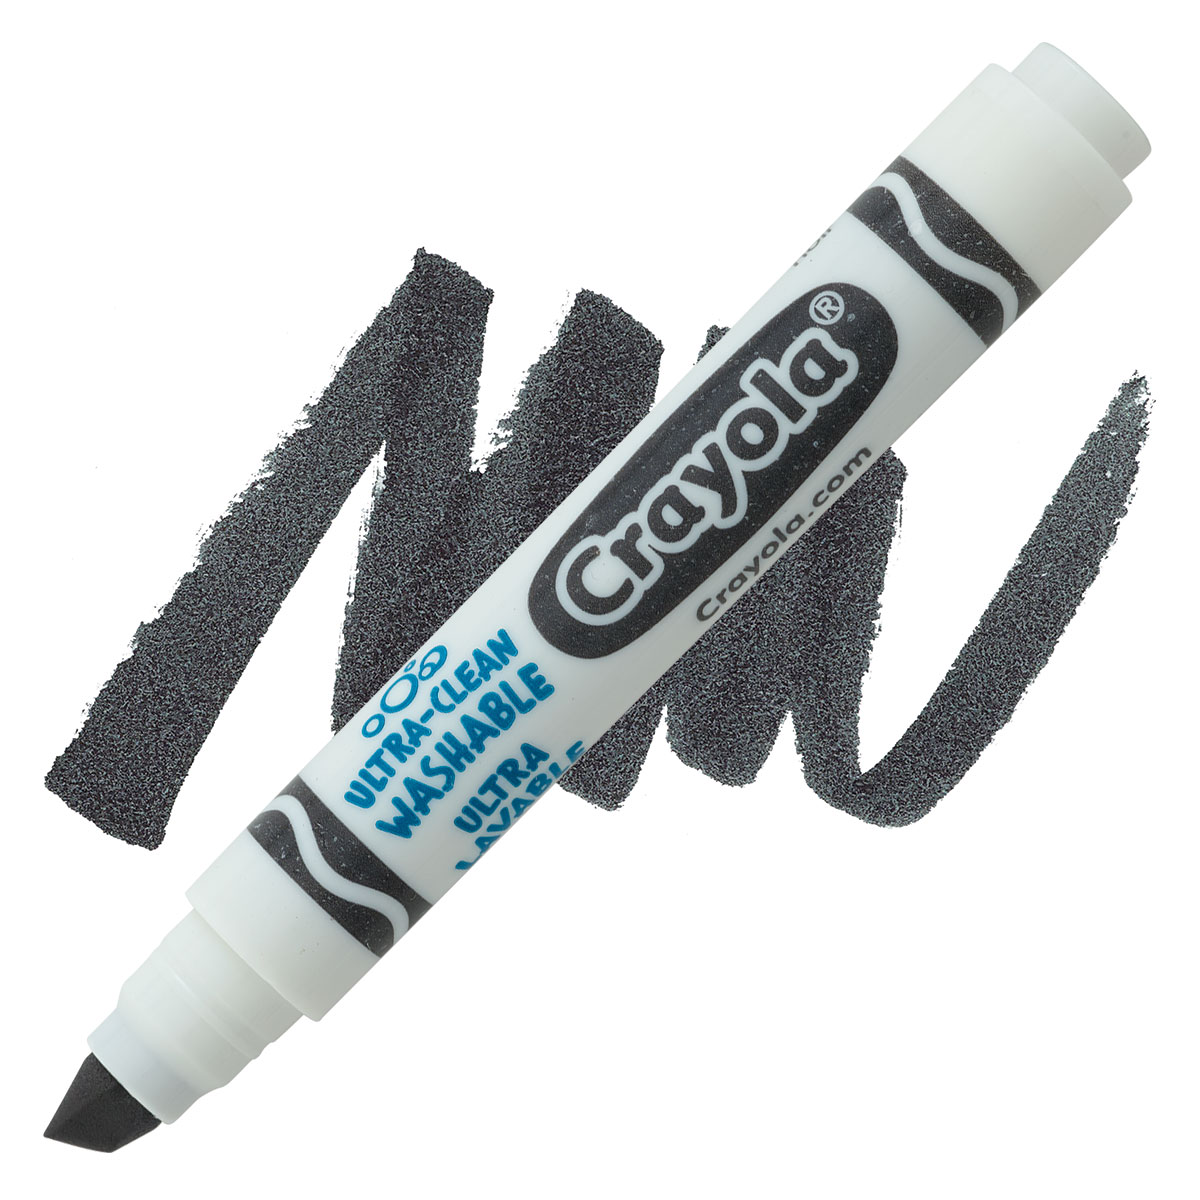 How to remove black crayola marker from skin? Soap, water, alcohol